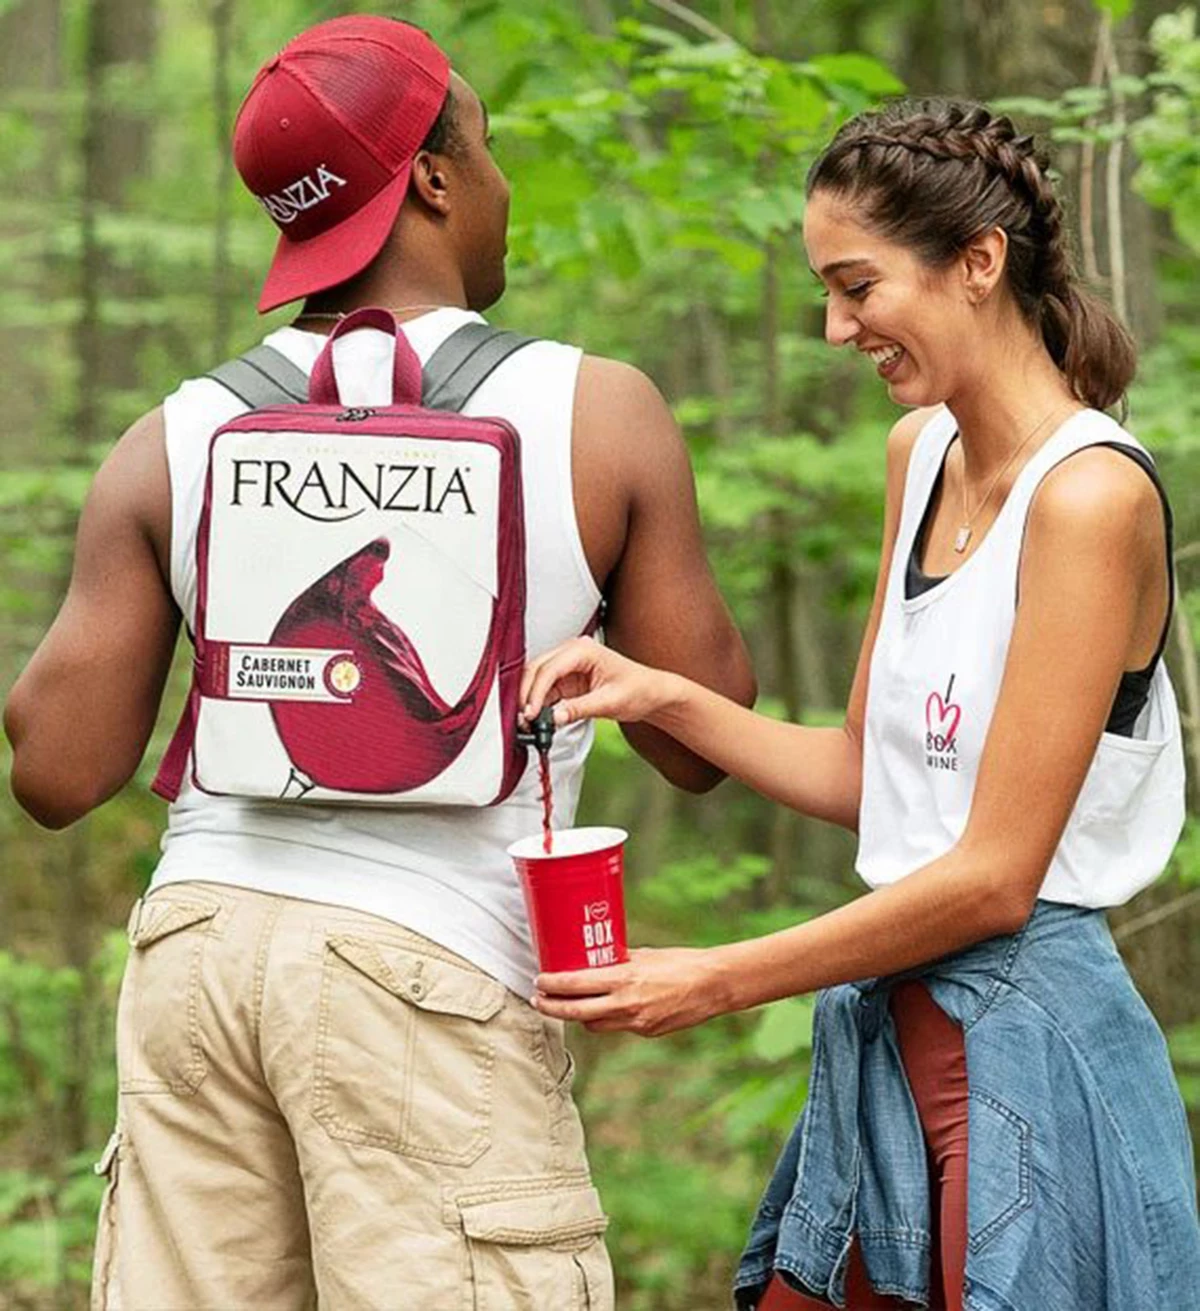 How Much Does Franzia Boxed Wine Cost